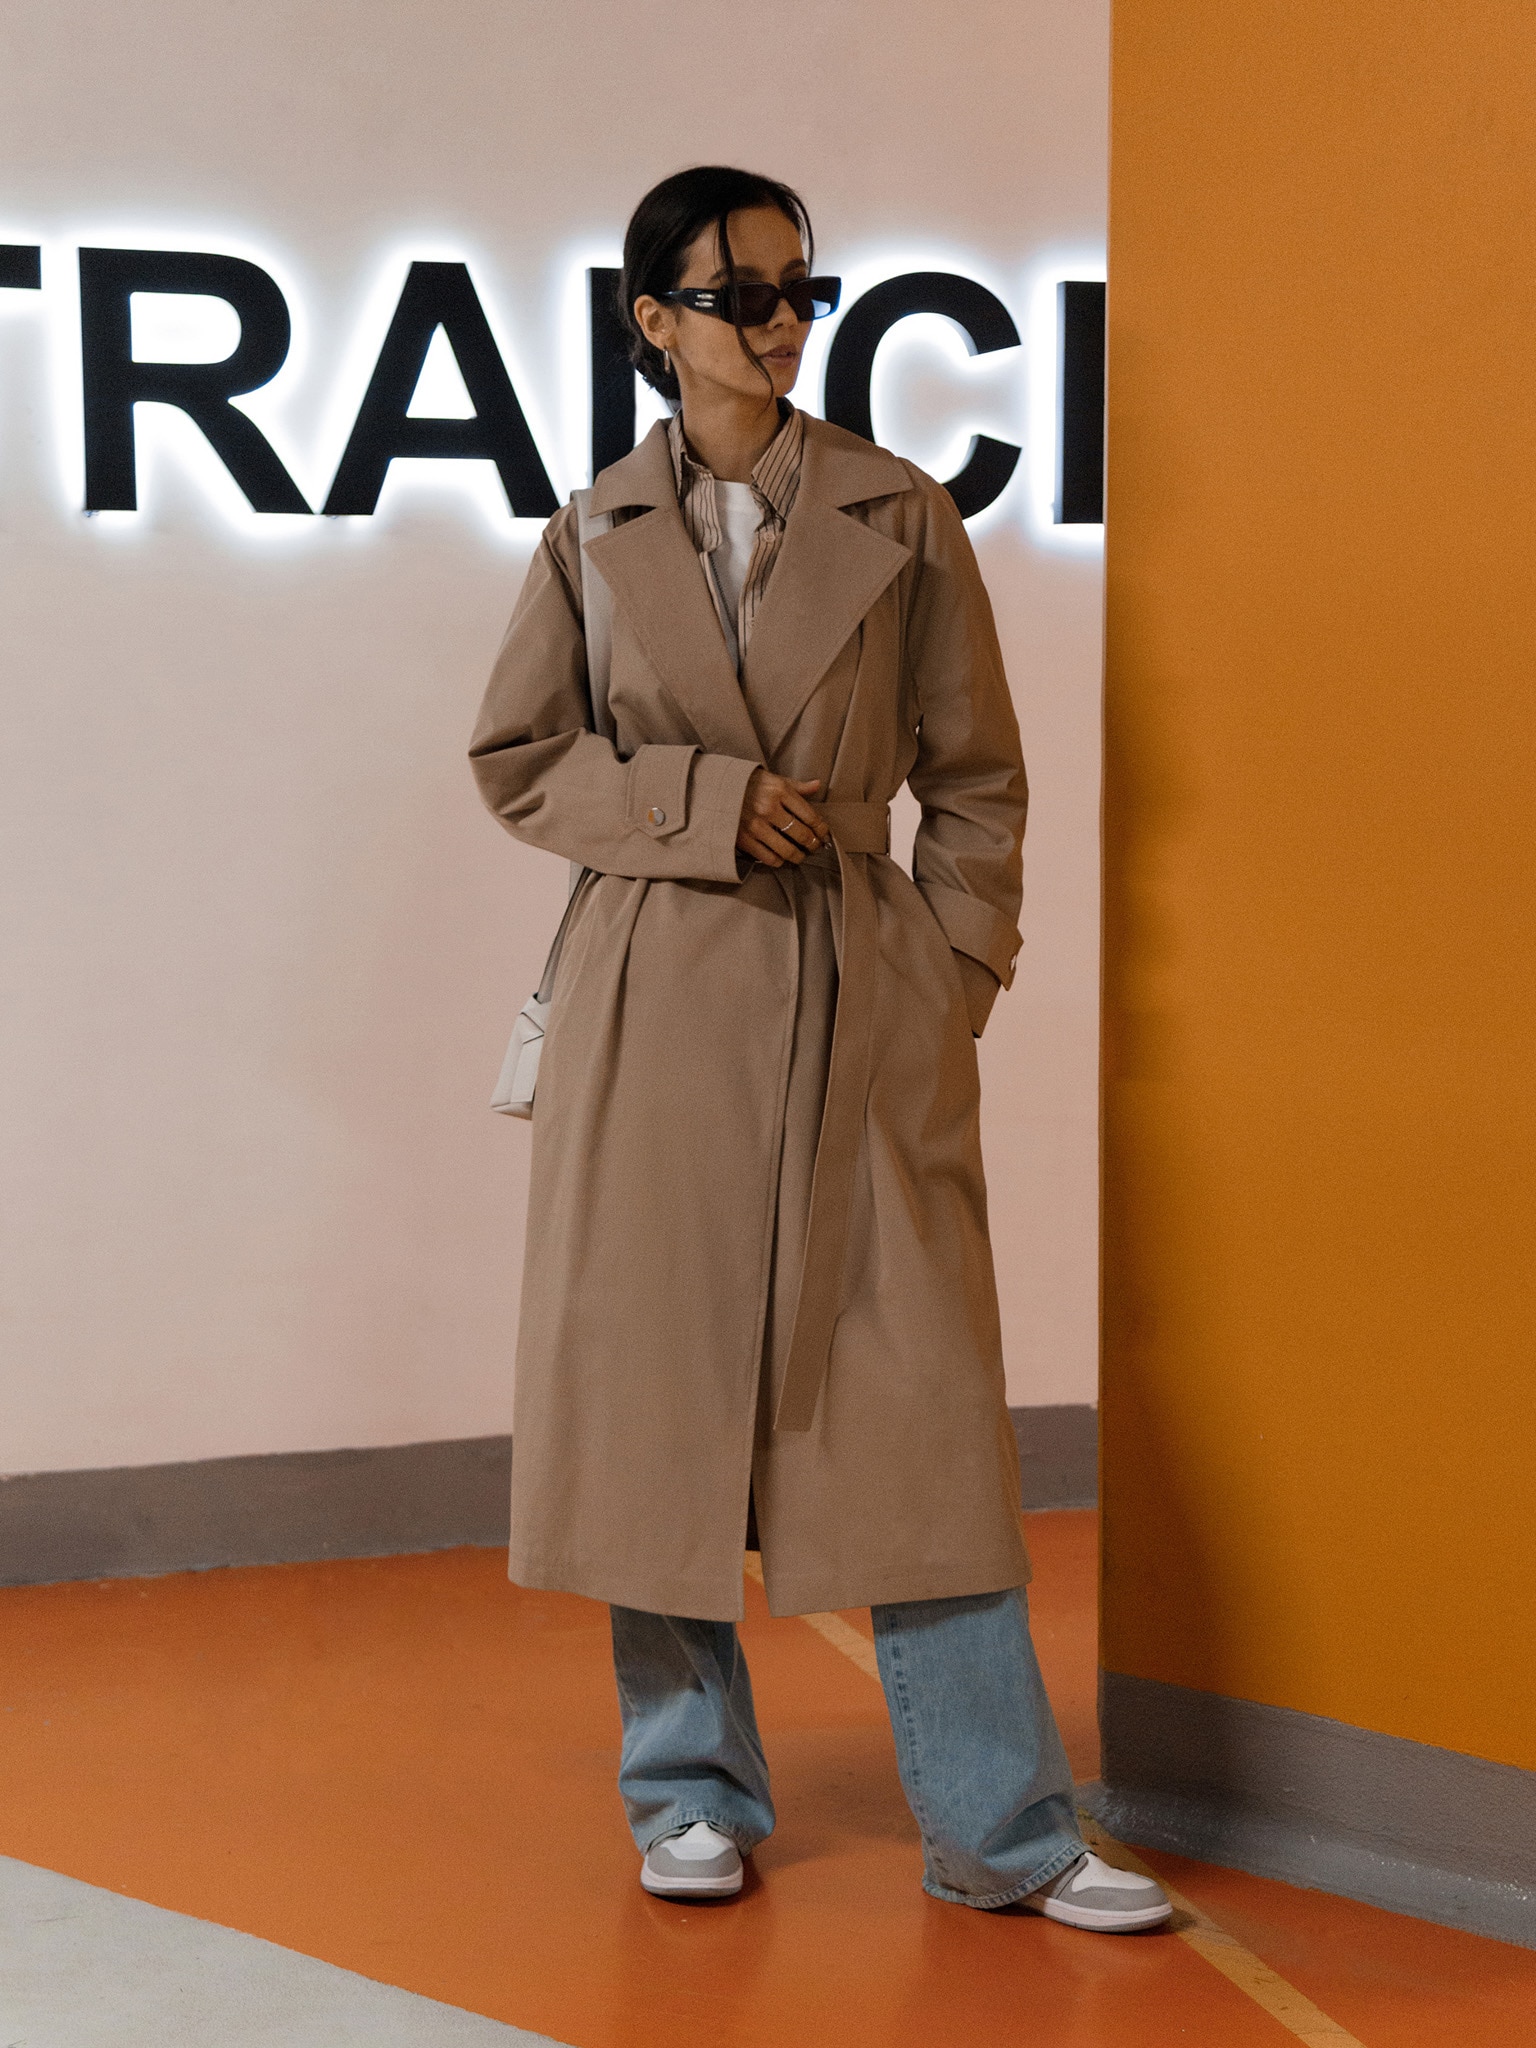 Oversized wide-lapel trench coat